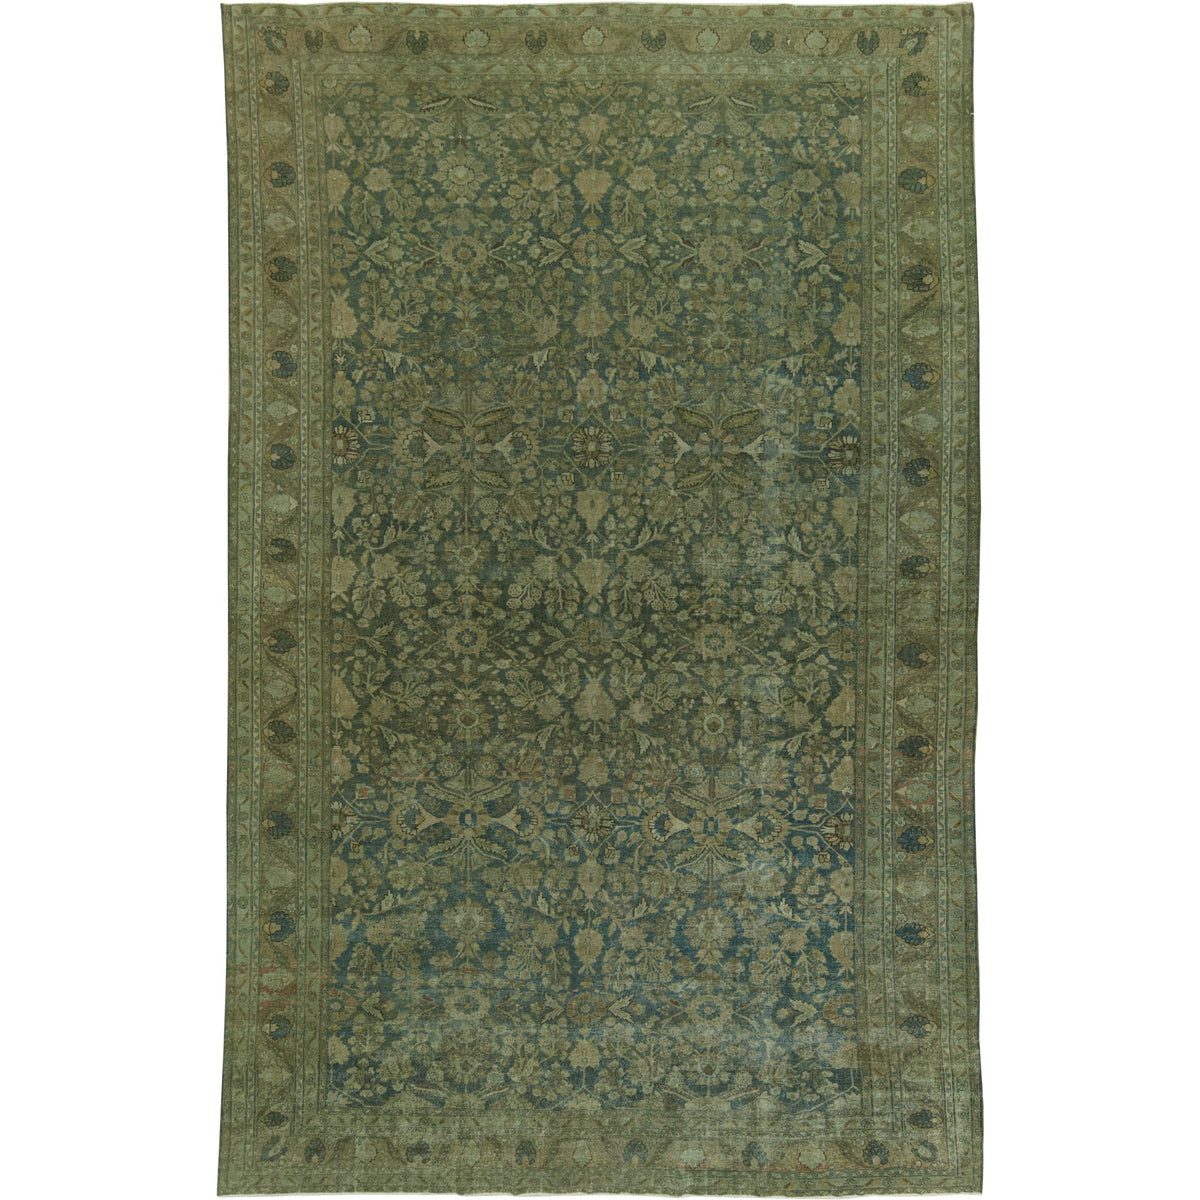 Narcis | Embrace the Luxury of Persian Hand-Knotted Rugs | Kuden Rugs